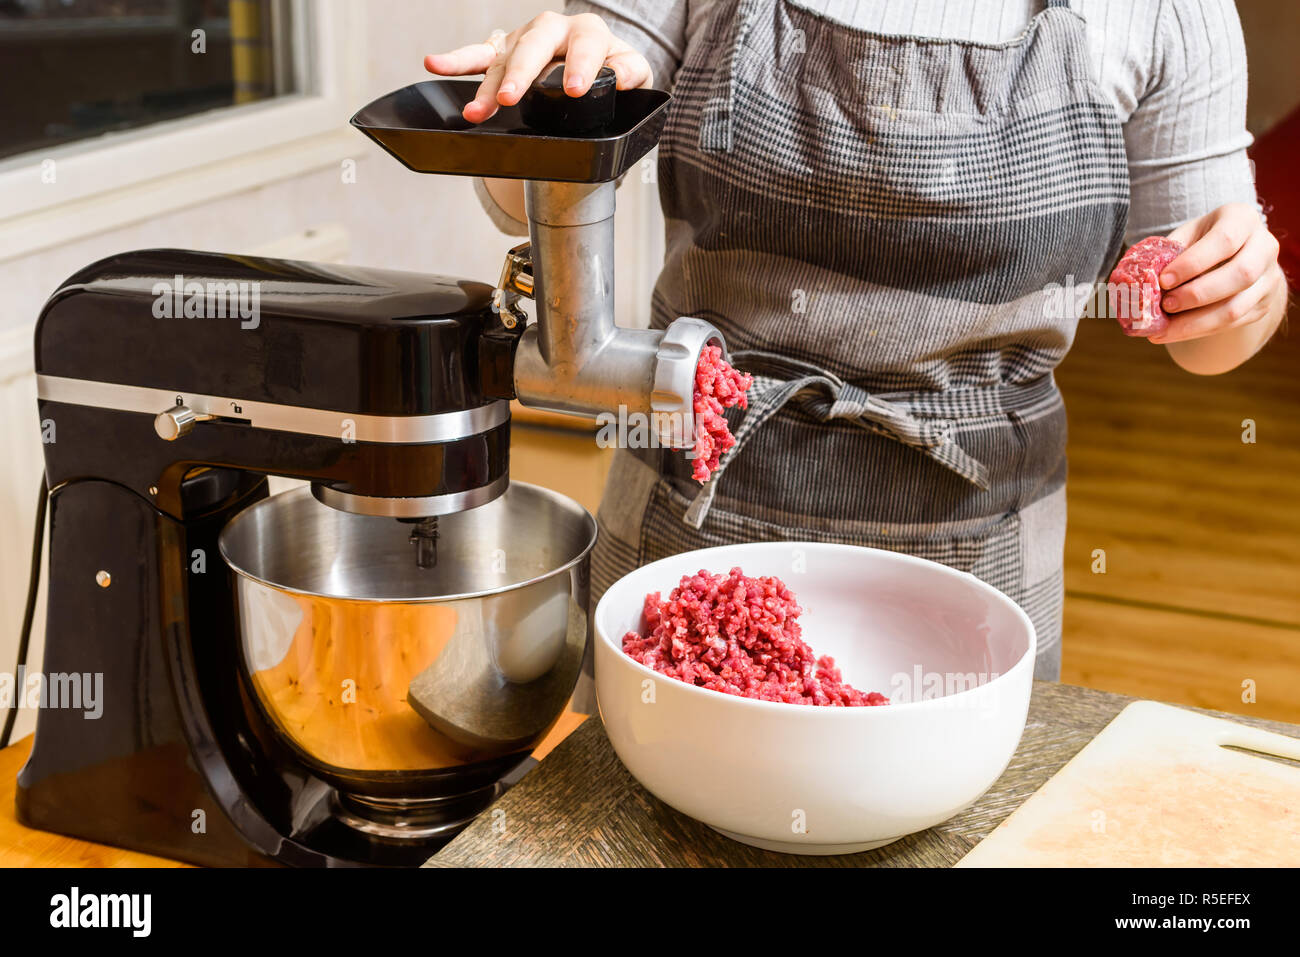 Person using domestic meat grinder while mincing meat at home. Stock Photo